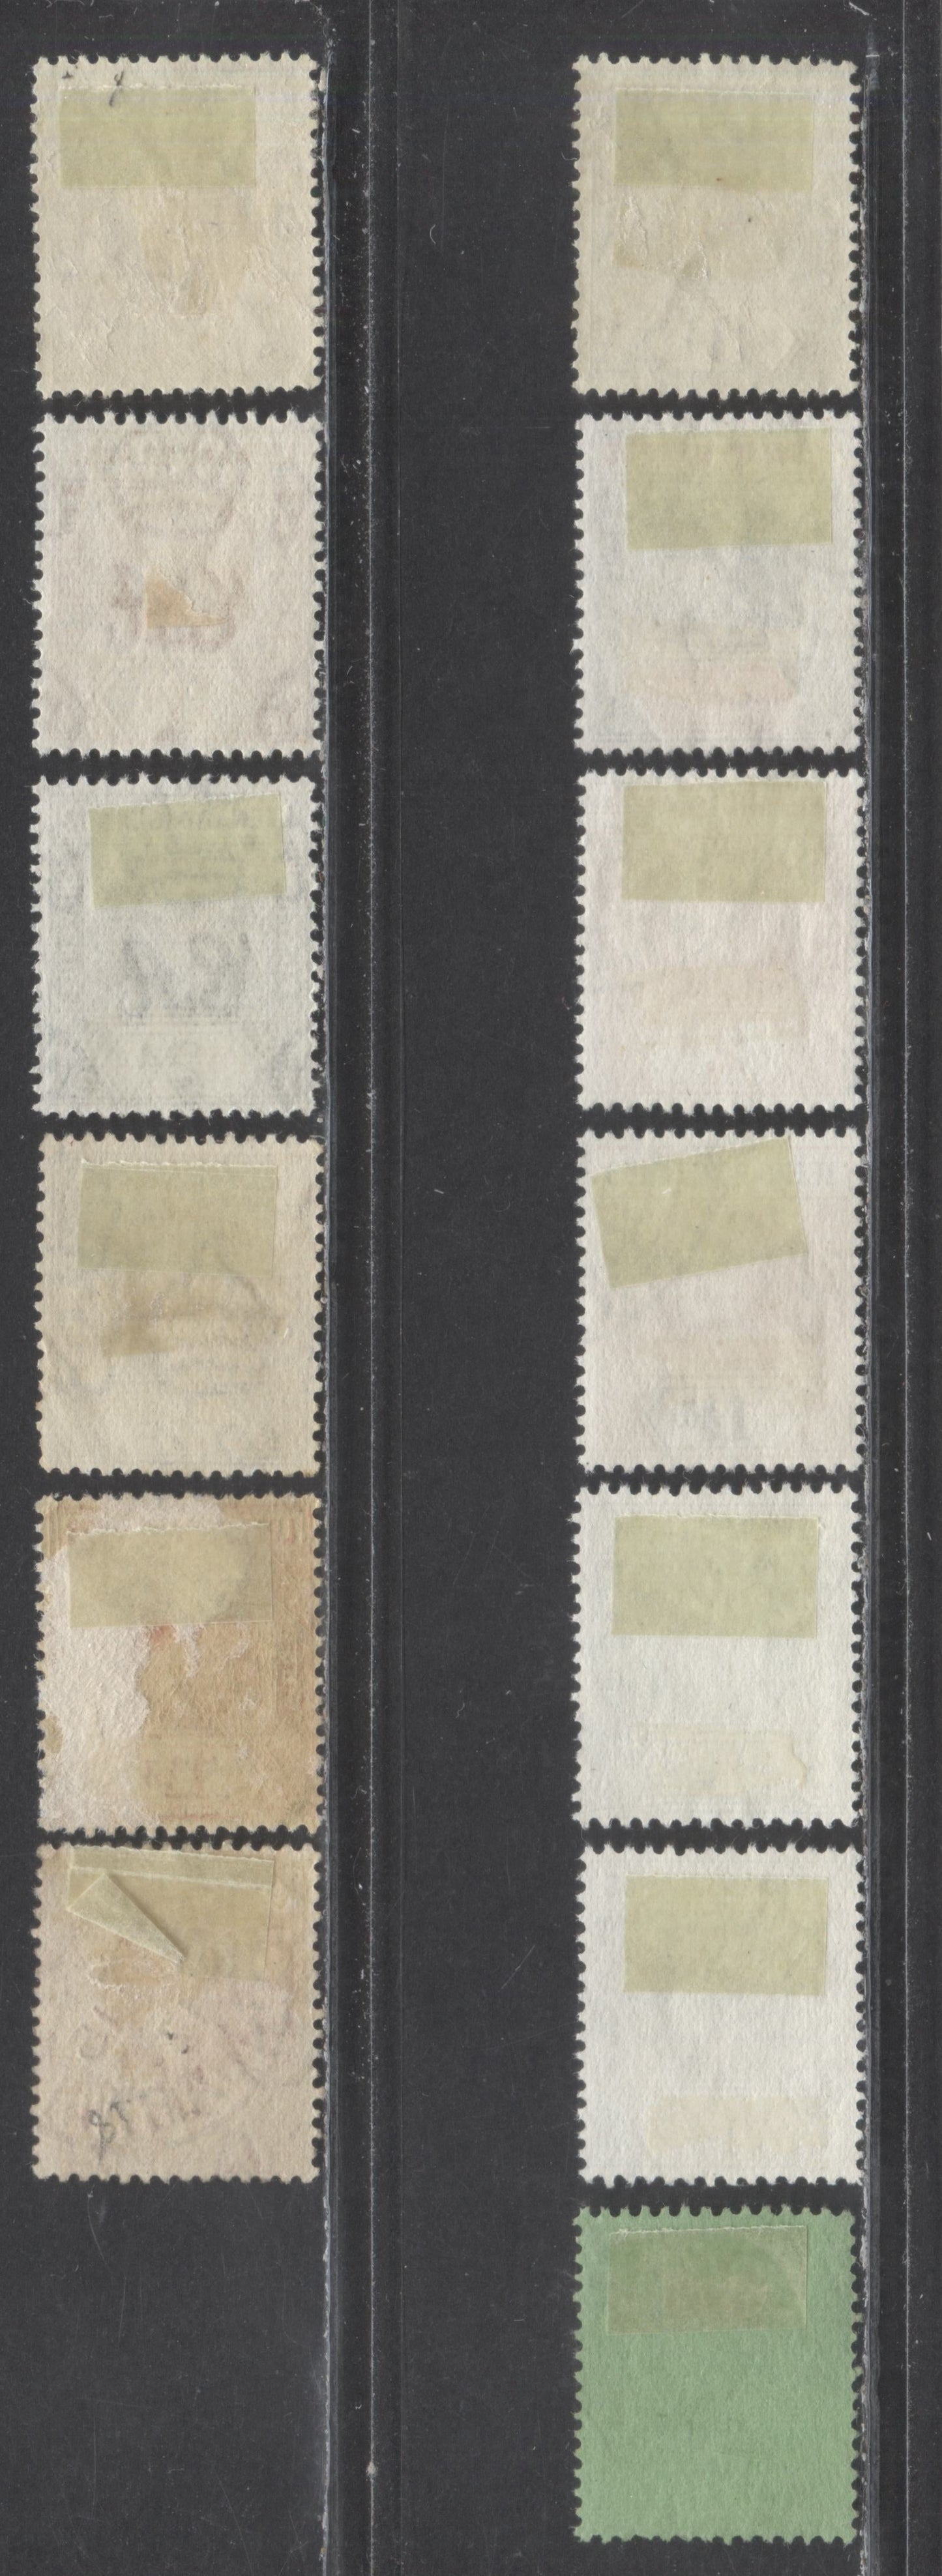 Lot 444 Leeward Islands SC#48a/125 1912-1951 Keyplate Definitives, 13 Fine/Very Fine Used Singles, Click on Listing to See ALL Pictures, 2022 Scott Classic Cat. $16.65 USD